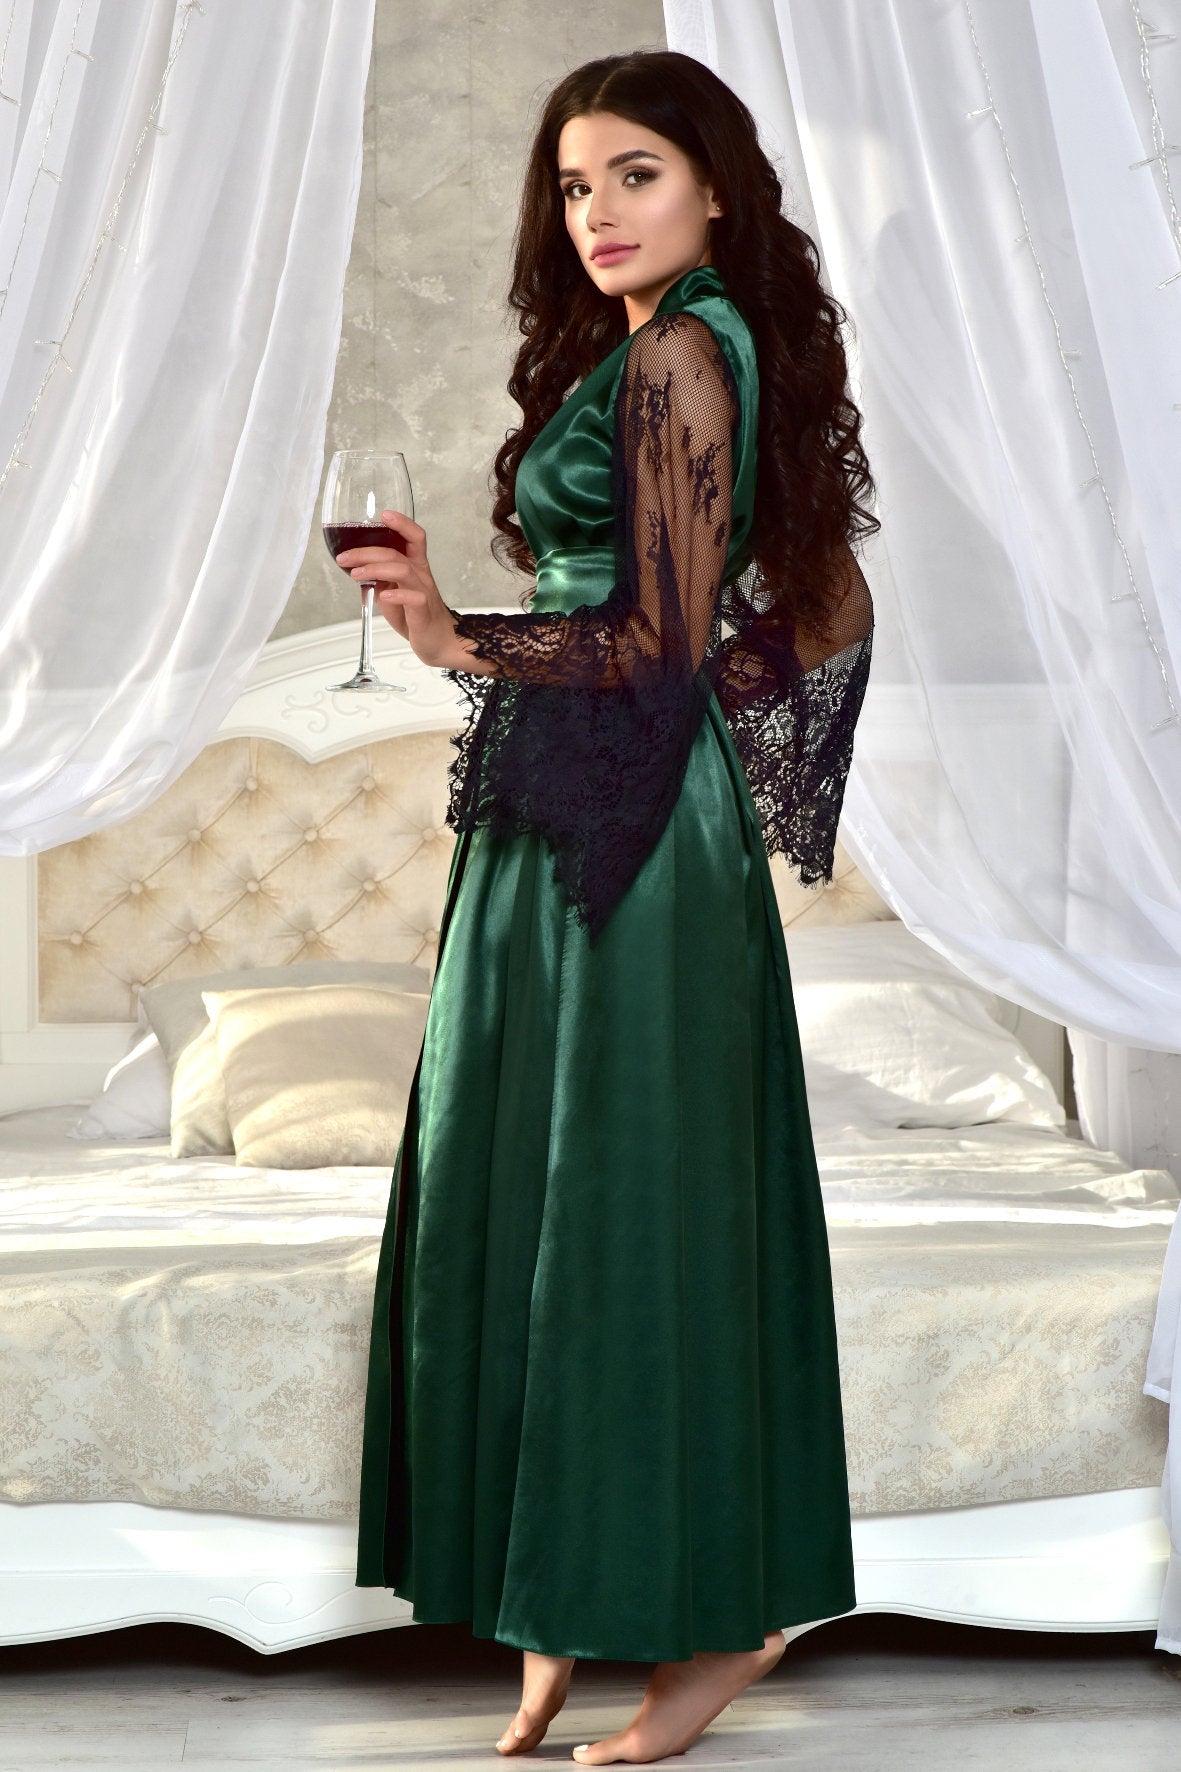 Handcrafted Bridal Robe in Dark Green Satin with Plus Size Options